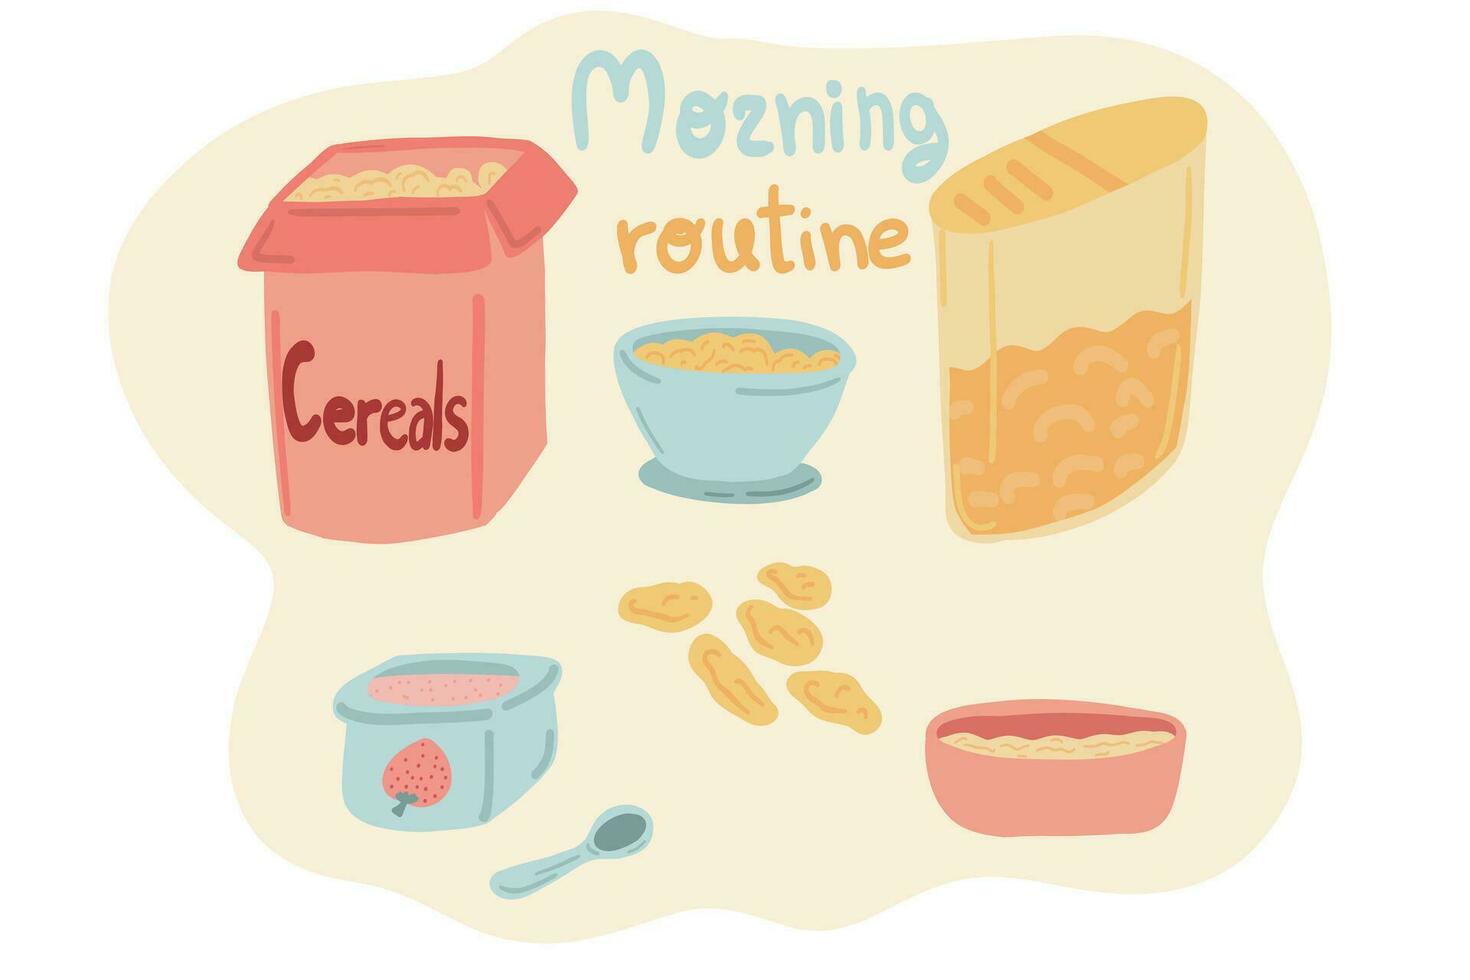 Oat and cereals set hand drawn icons vector